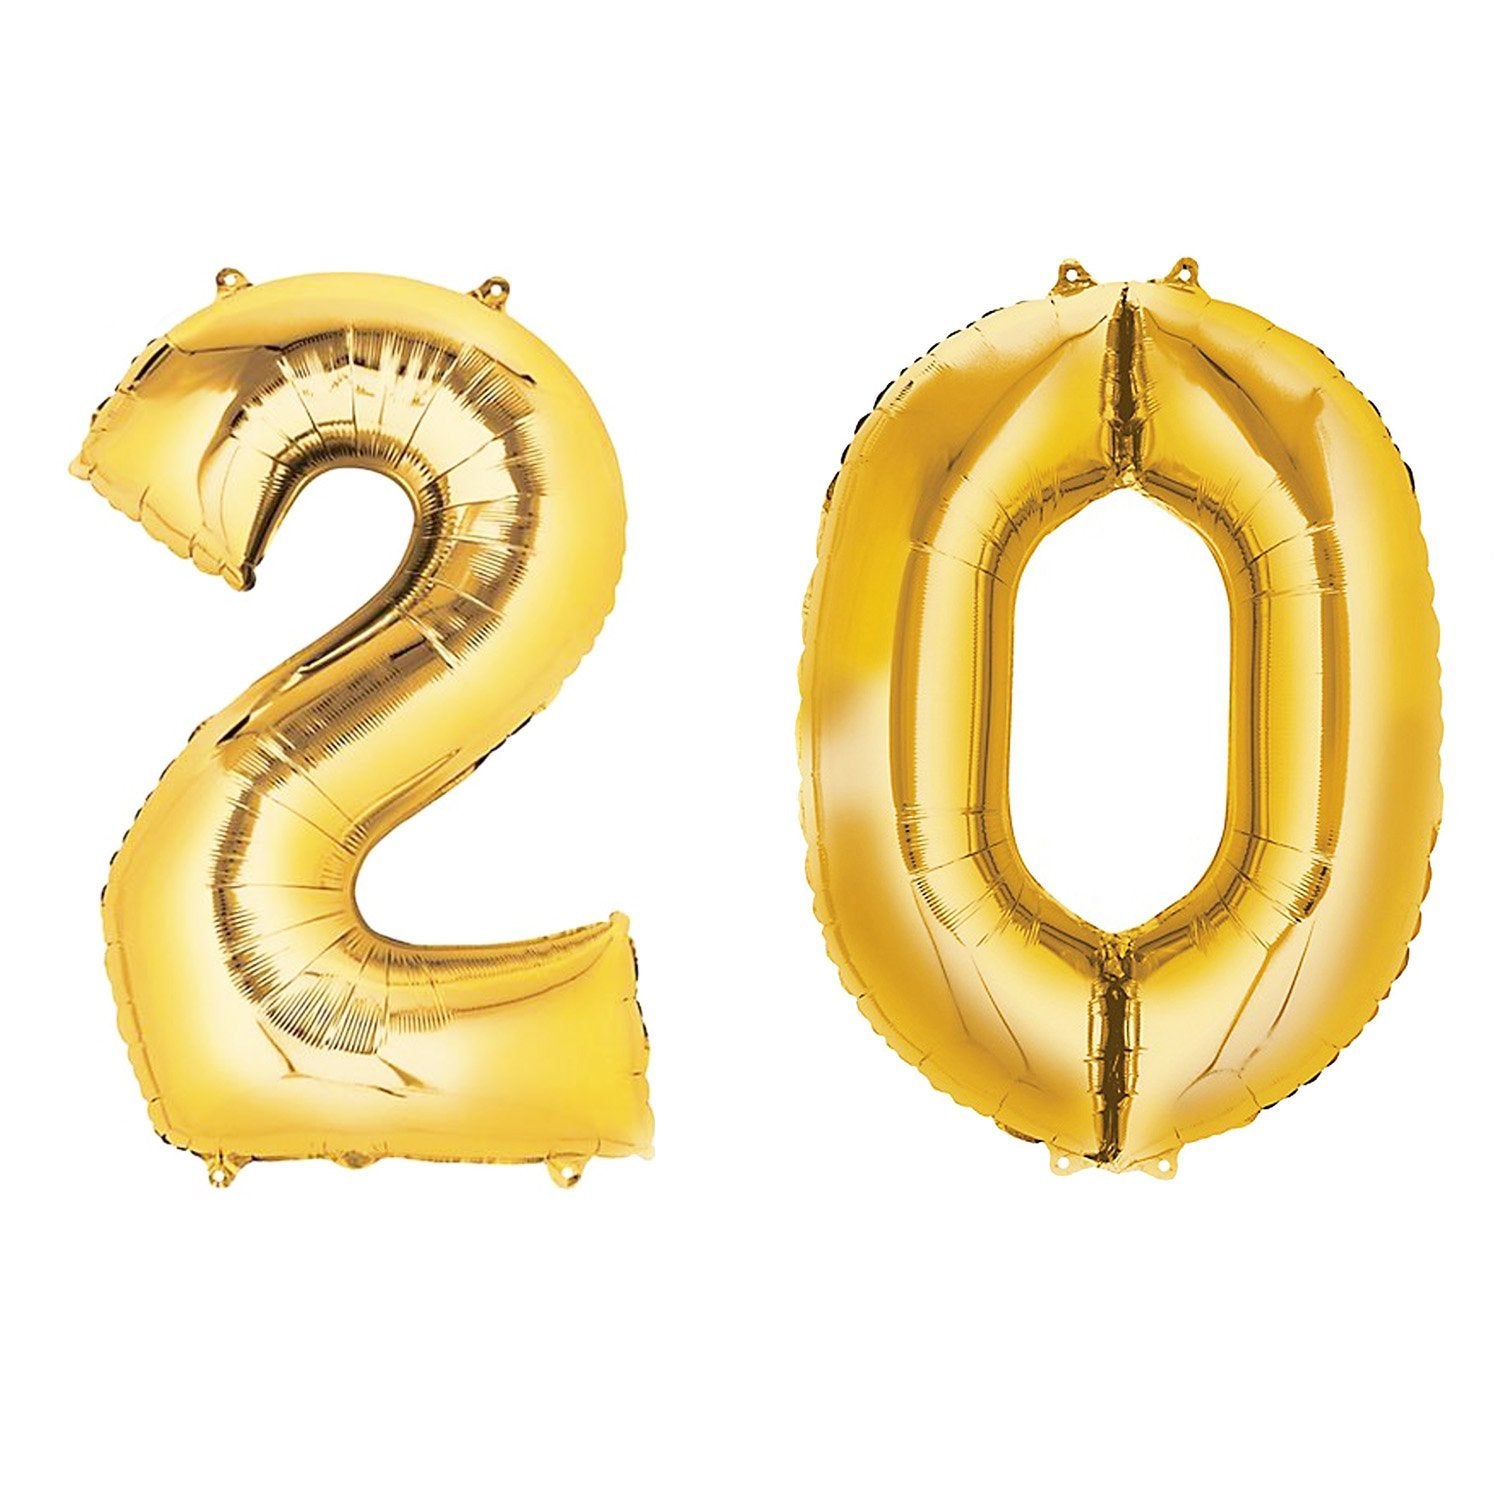 2020 Graduation Balloons - Gold - Pretty Collected